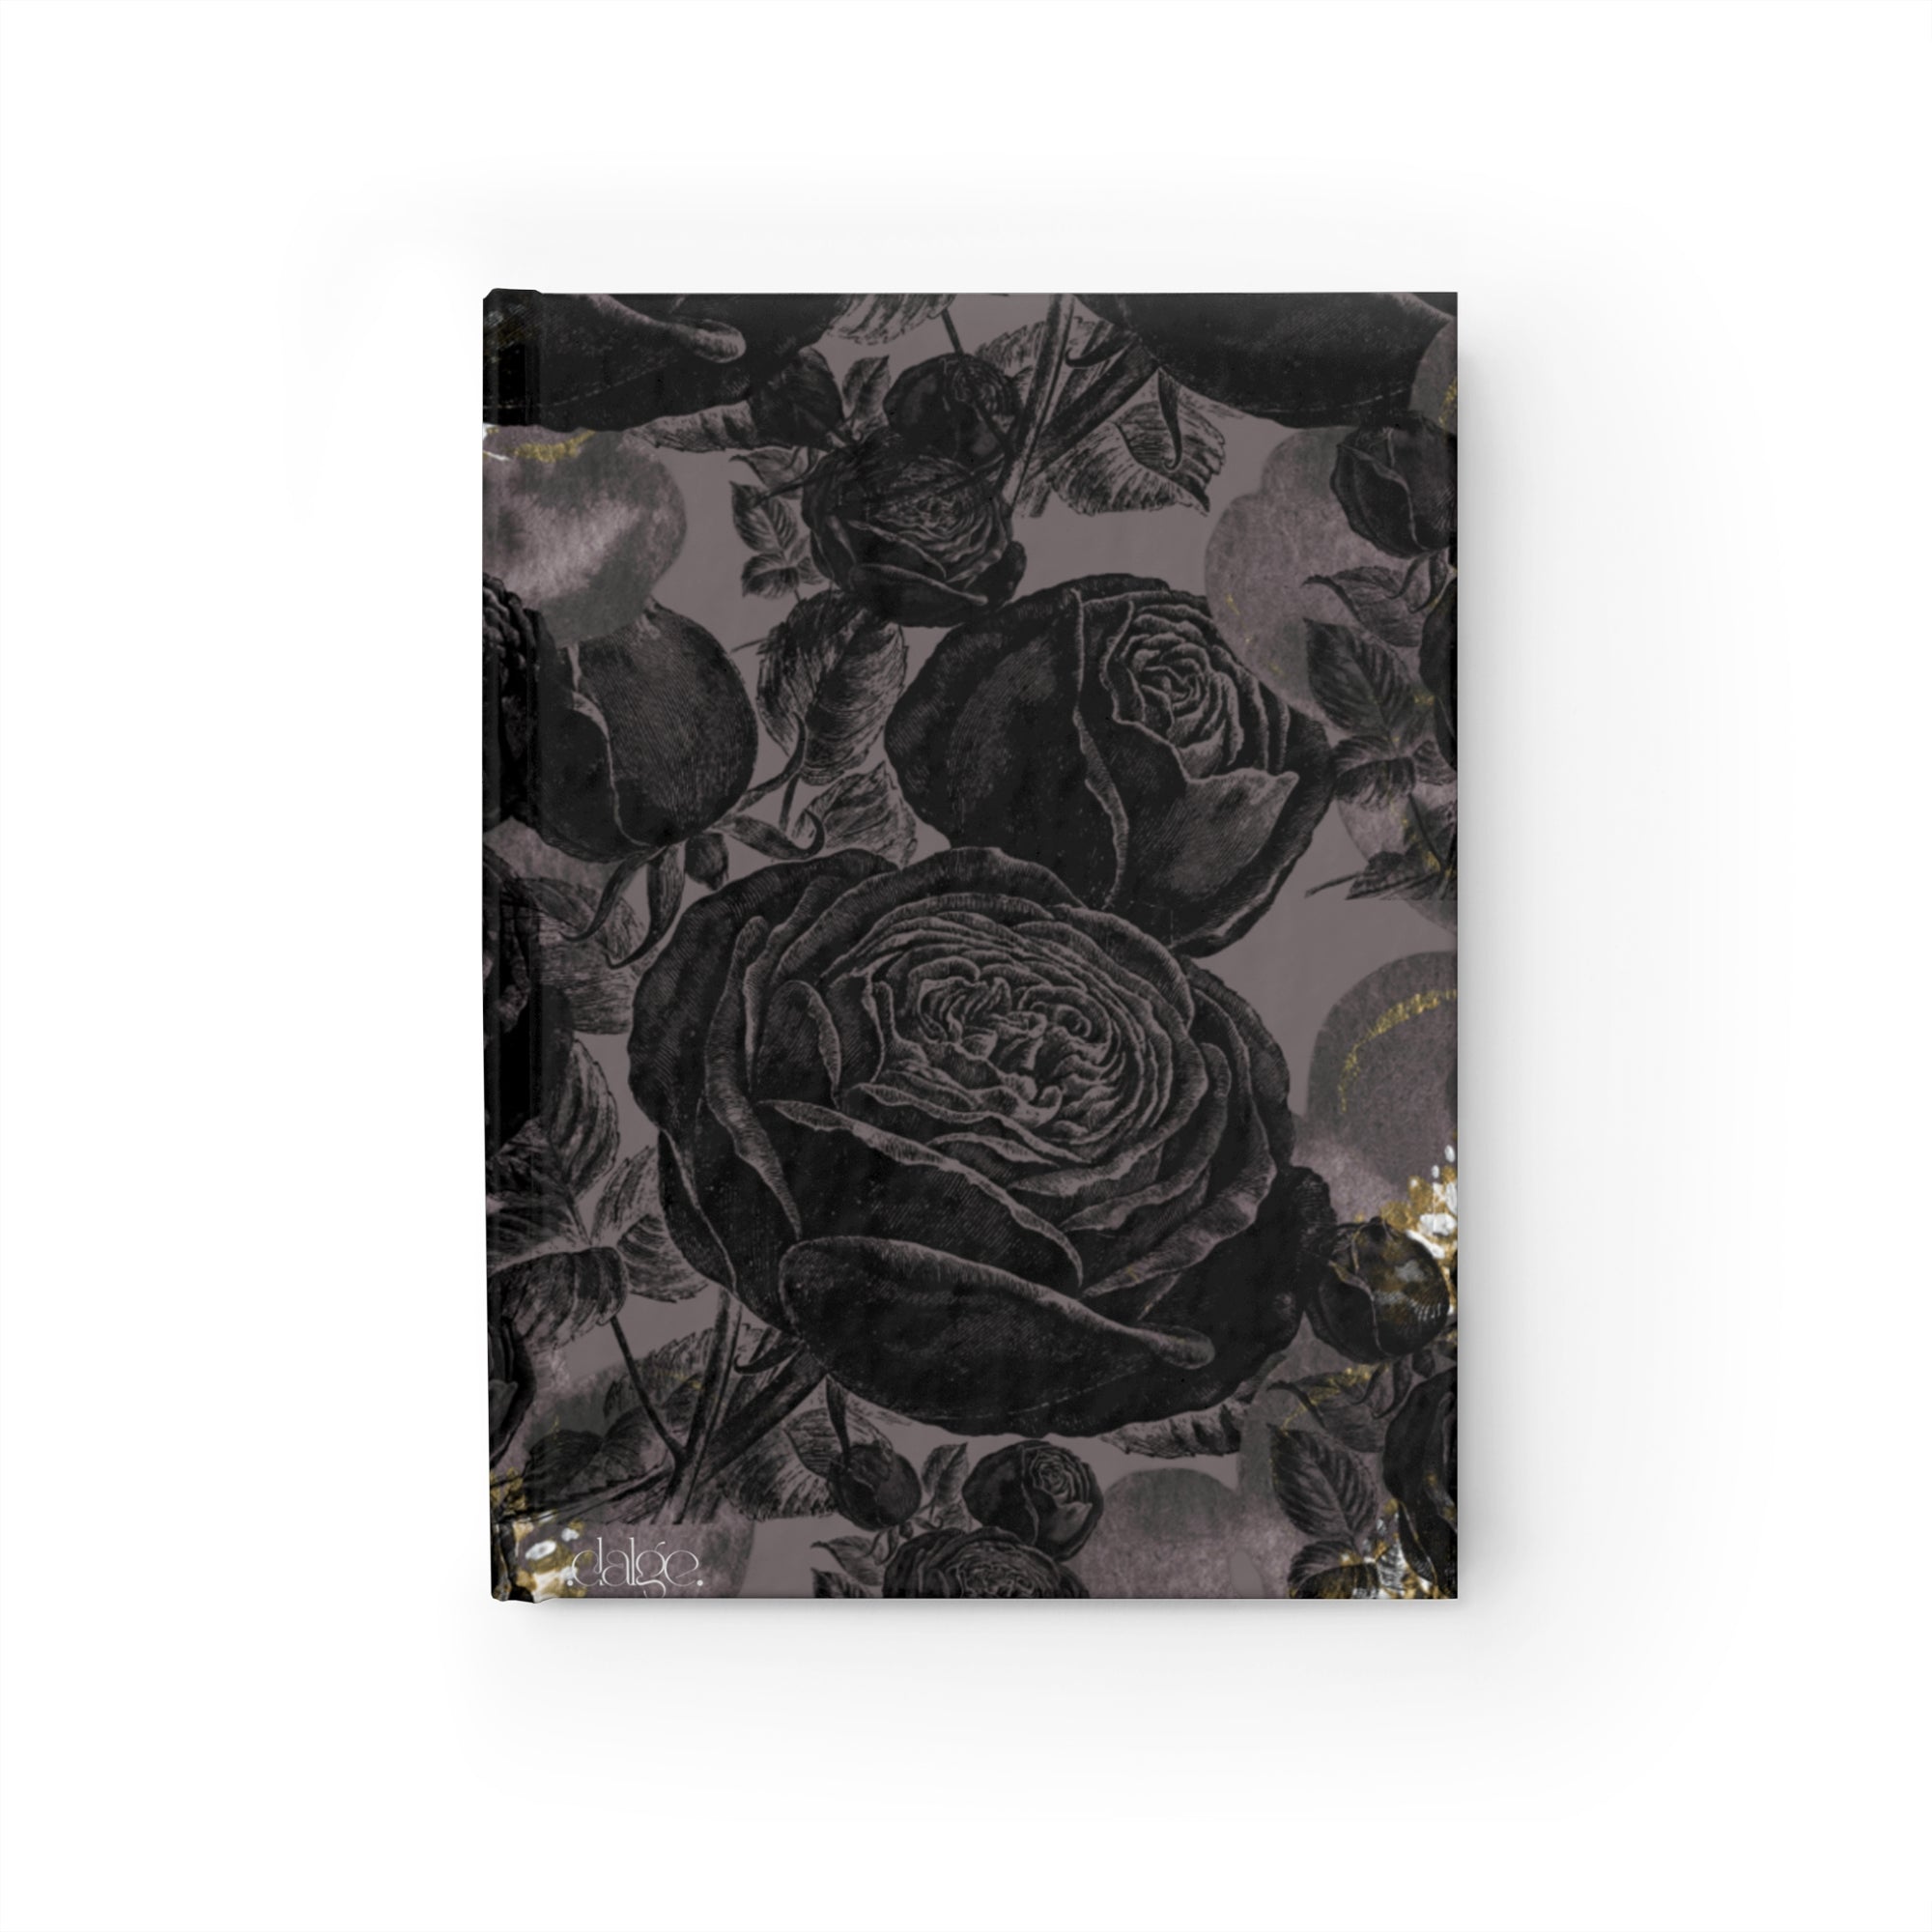 Dark Academia Hard Cover Journal Notebook, Dark Journals. Ruled Line Journal.personalized gifts-gifts for teachers-gifts for students.-Paper products-Dalge